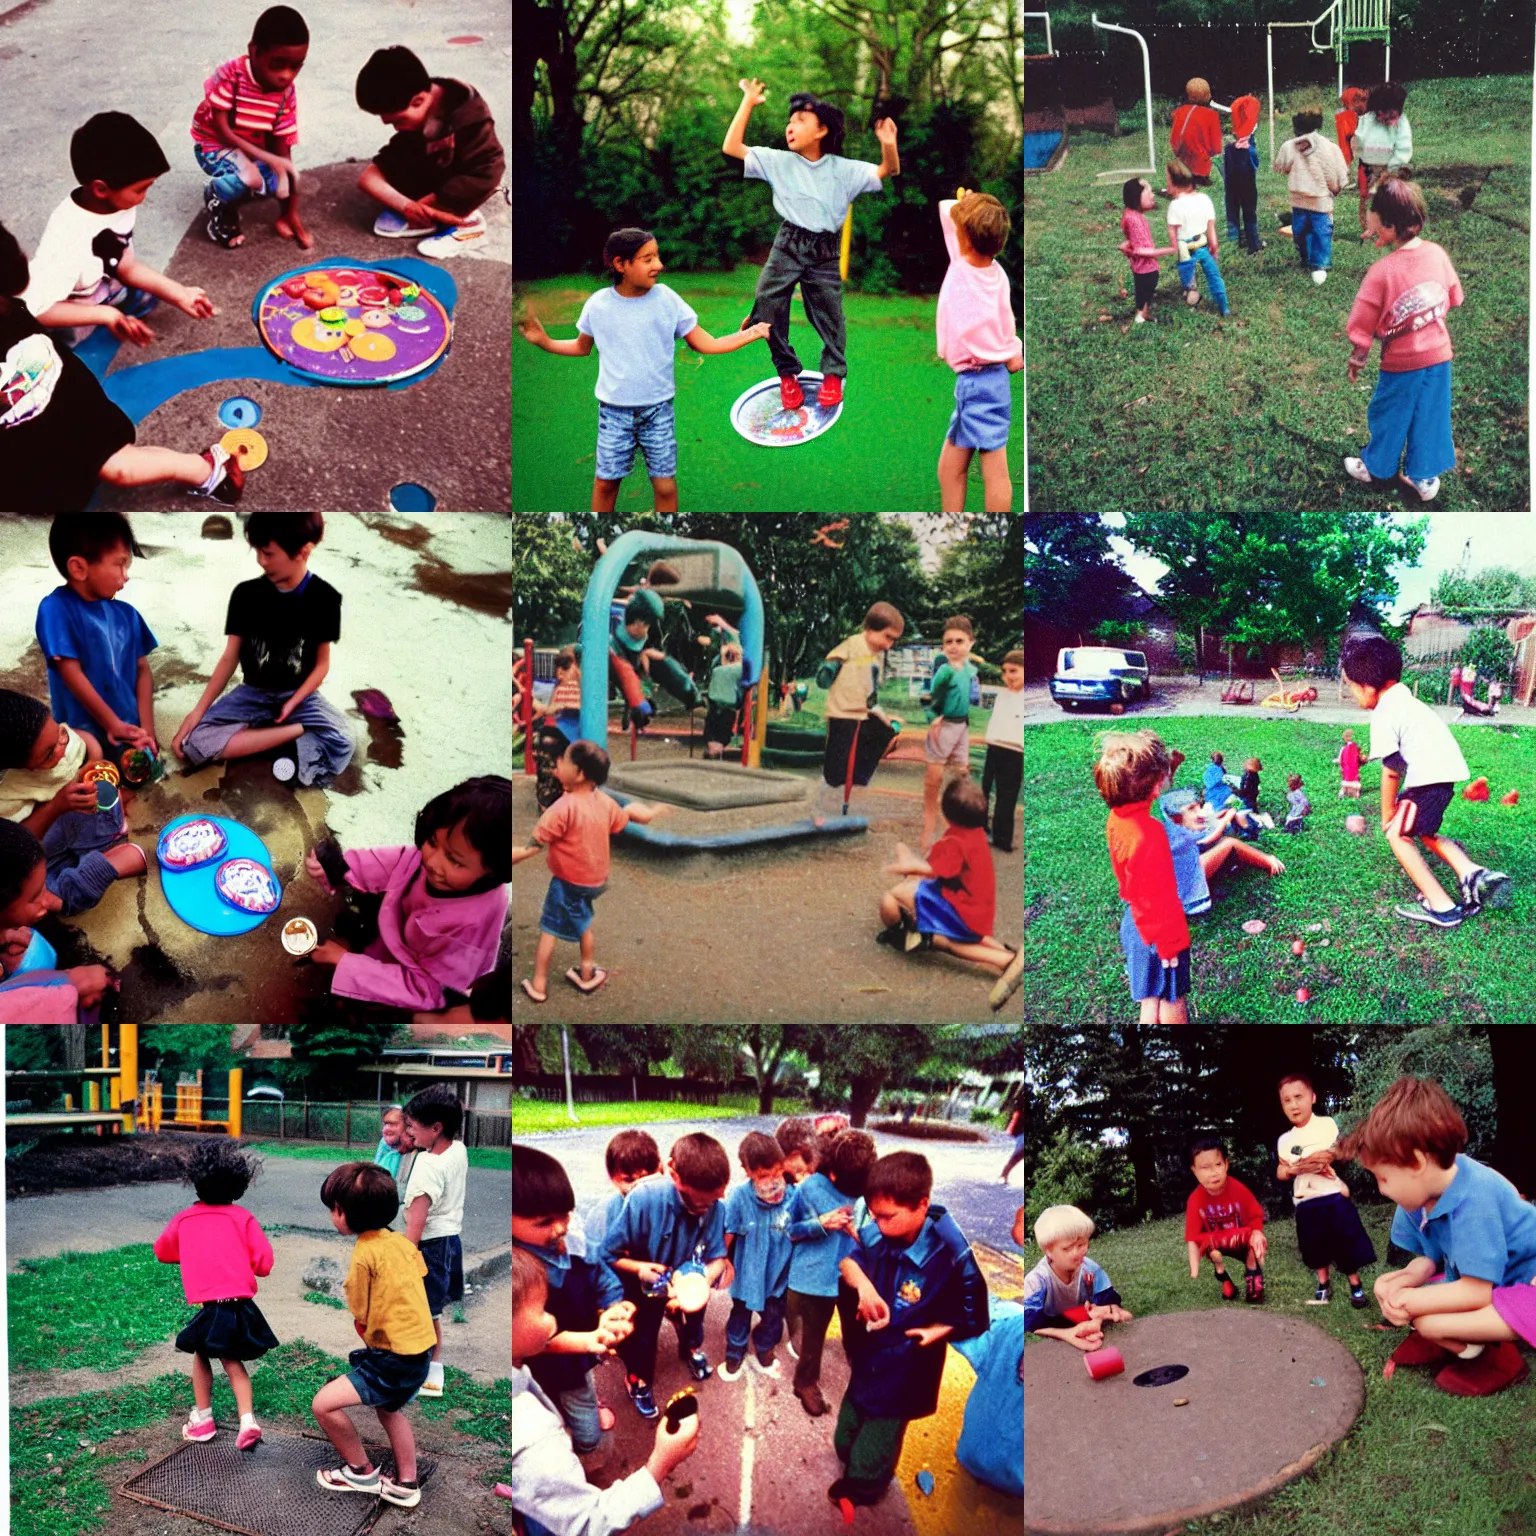 Prompt: children playing with pogs, 1 9 9 0 s school playground photo taken by disposable camera, developed 3 5 mm film